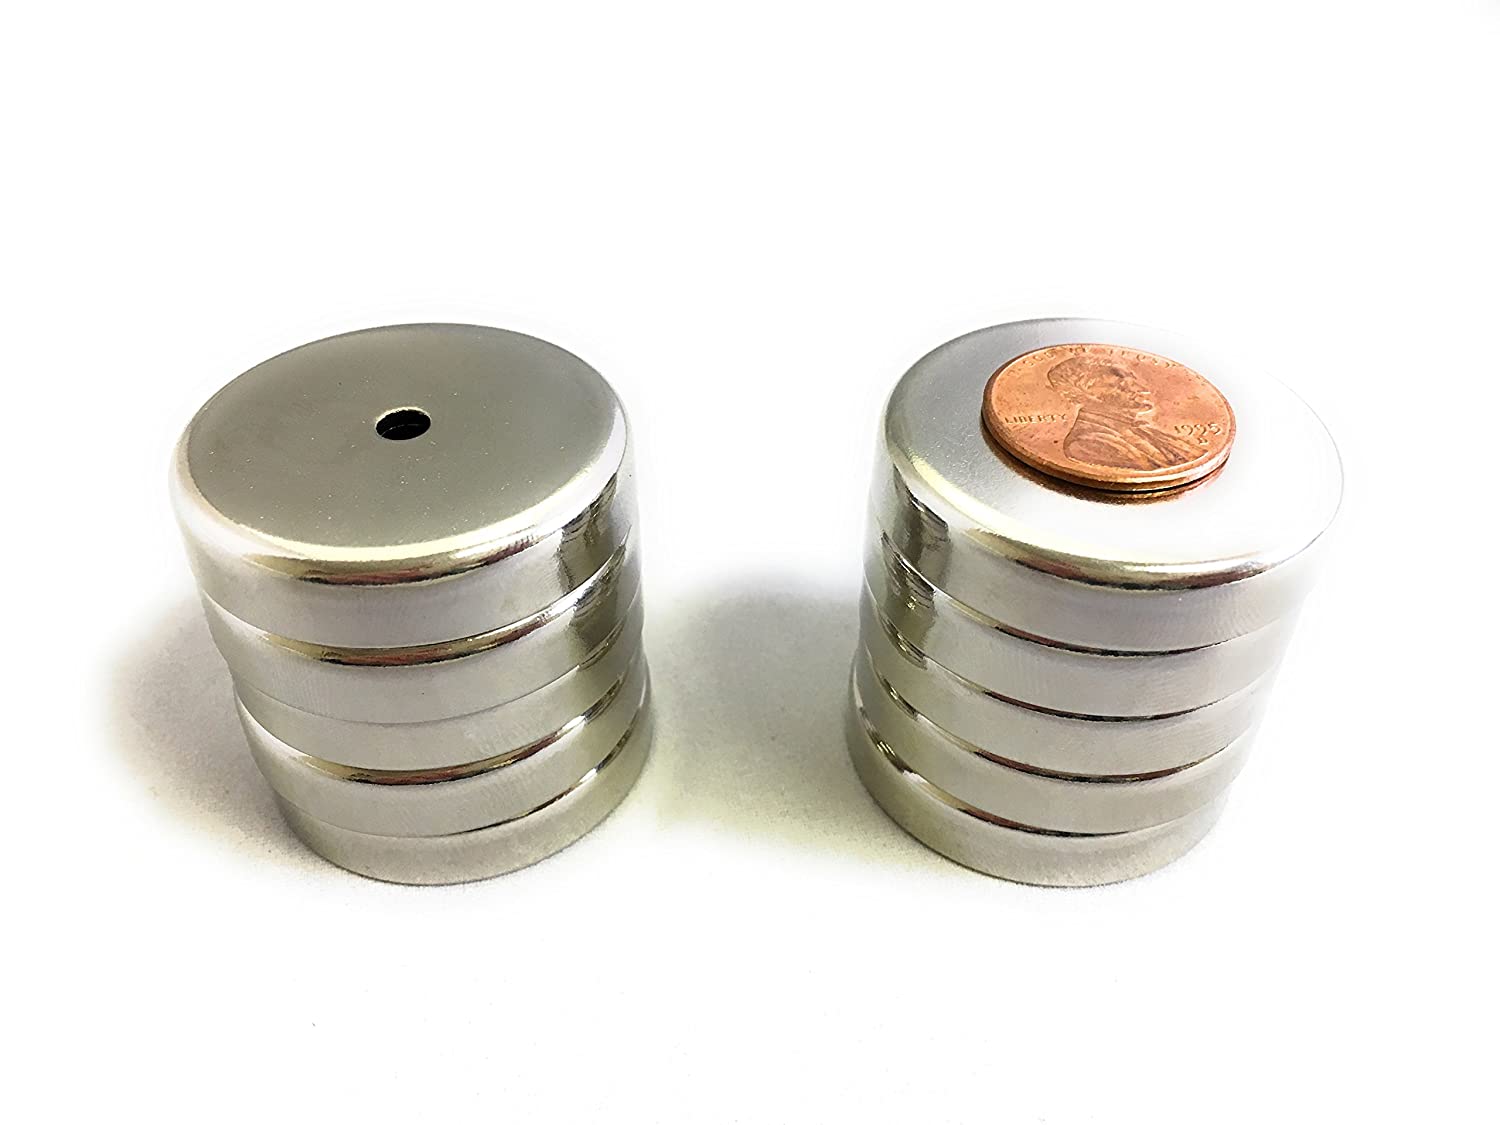 Disc Hole Magnet, 1.425 in x 0.3 in Strong Earth Round Industrial Magnets with 0.15 in Countersunk Hole, 12 lbs Powerful Pull Force - 10 Pack